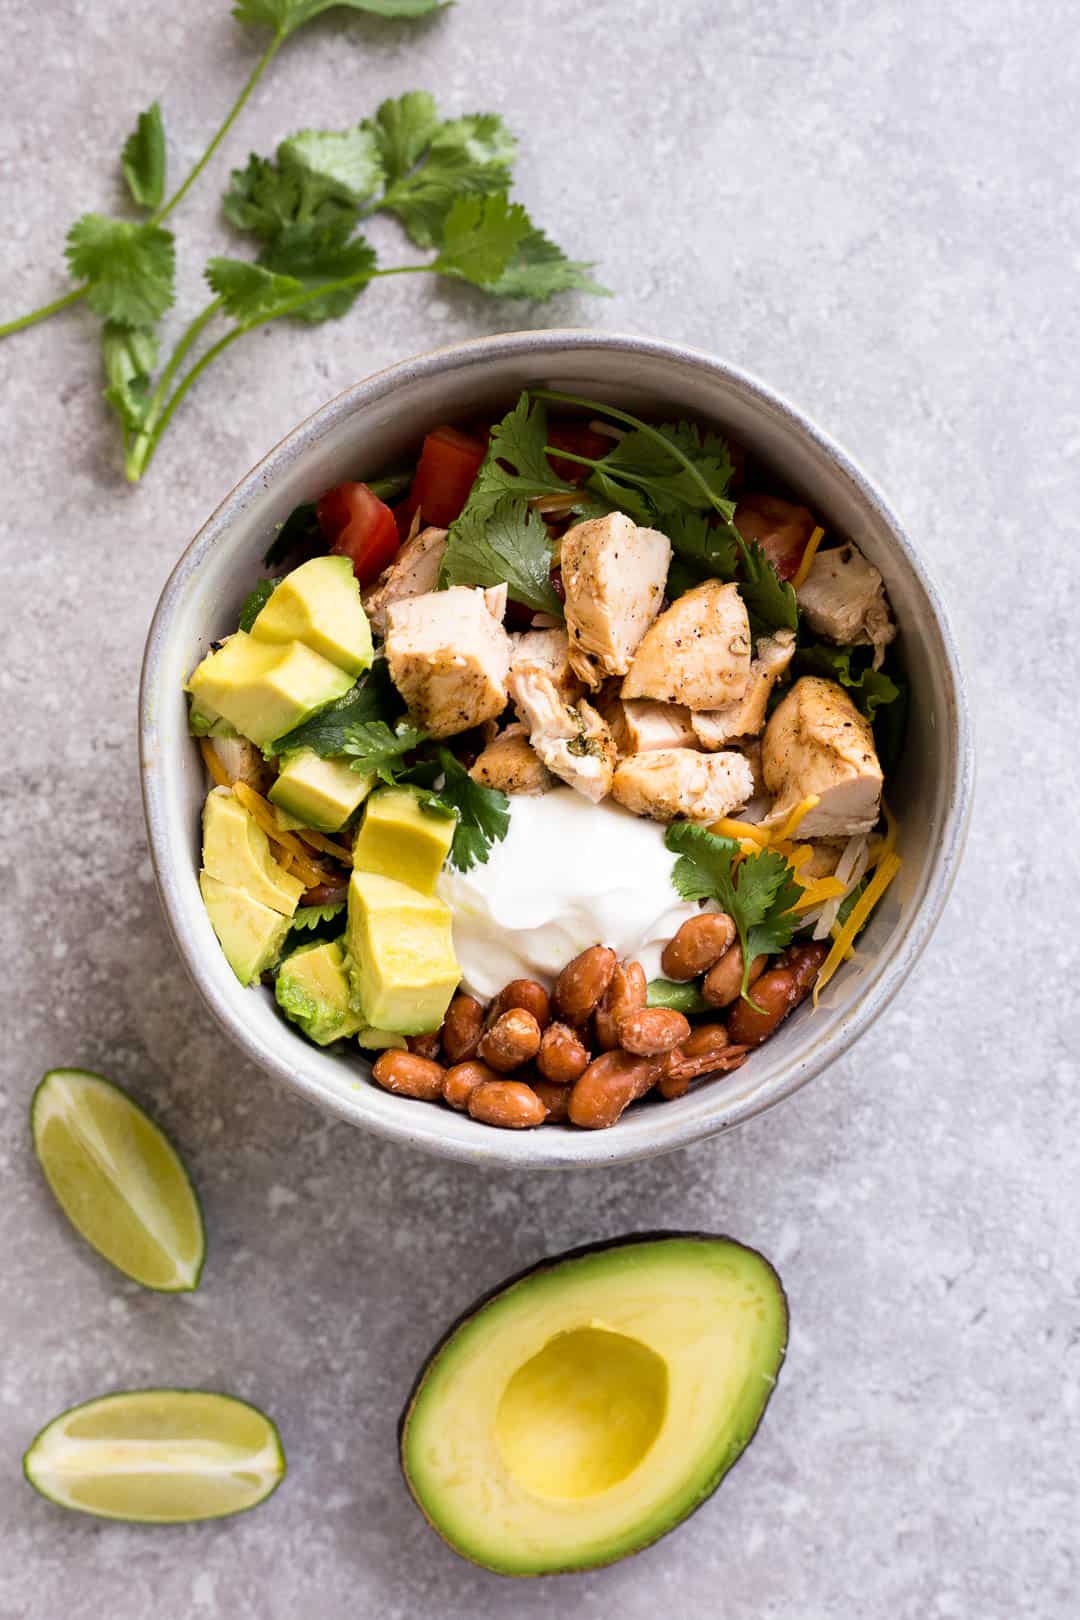 Chili Lime Grilled Chicken Bowls